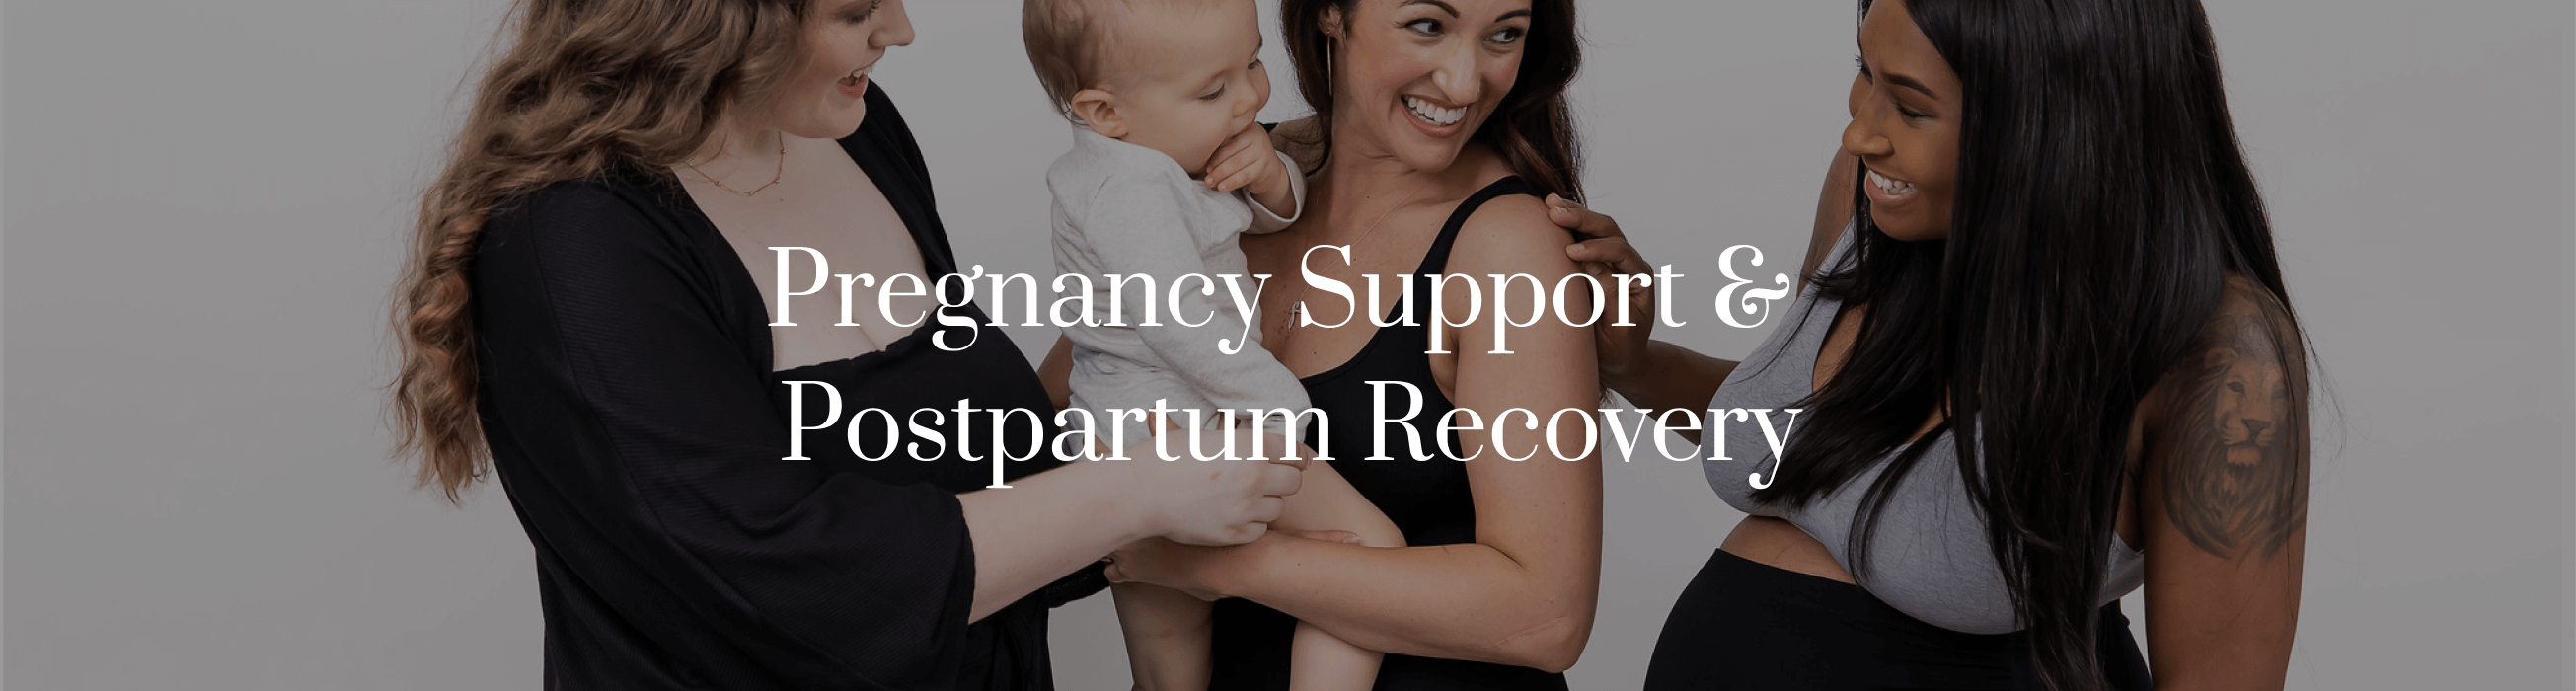 pregnancy support and postpartum recovery